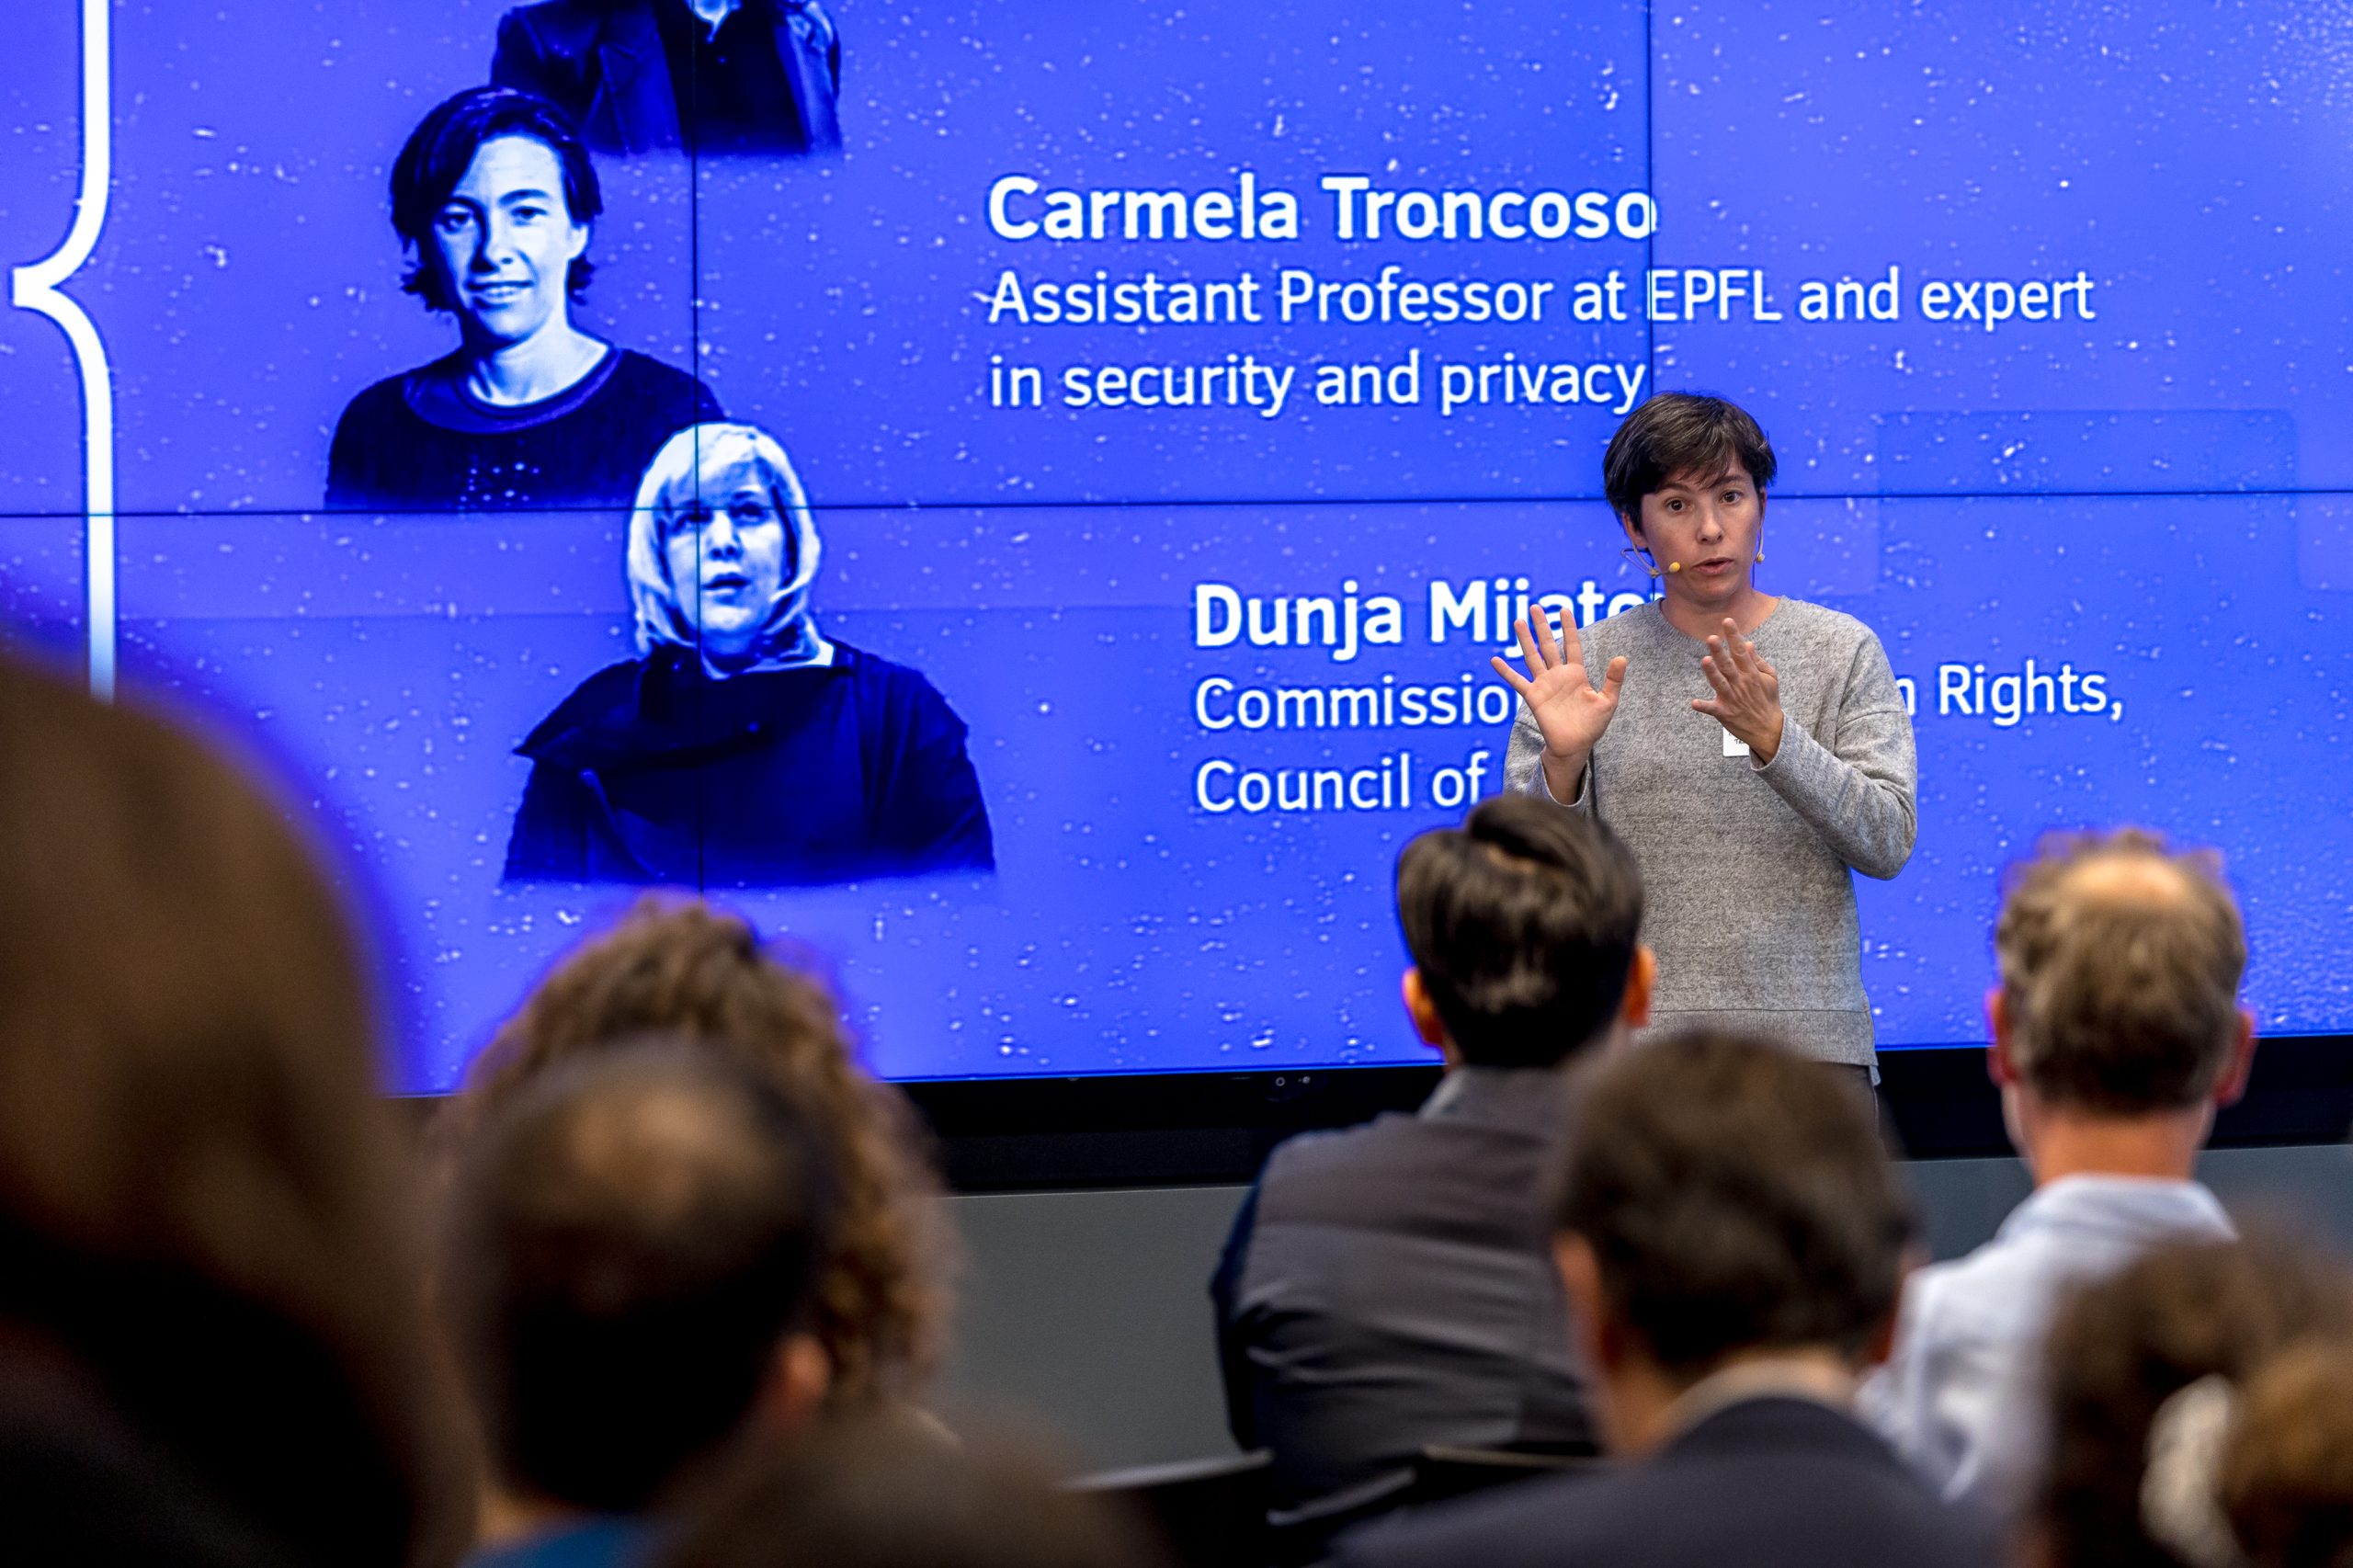 Carmela Troncoso, assistant professor at EPFL, gives a speech during the event organised by EDRI (European Digital Rights), Ecryption in the age of surveillance on 26 September 2023 in Brussels, Belgium. 